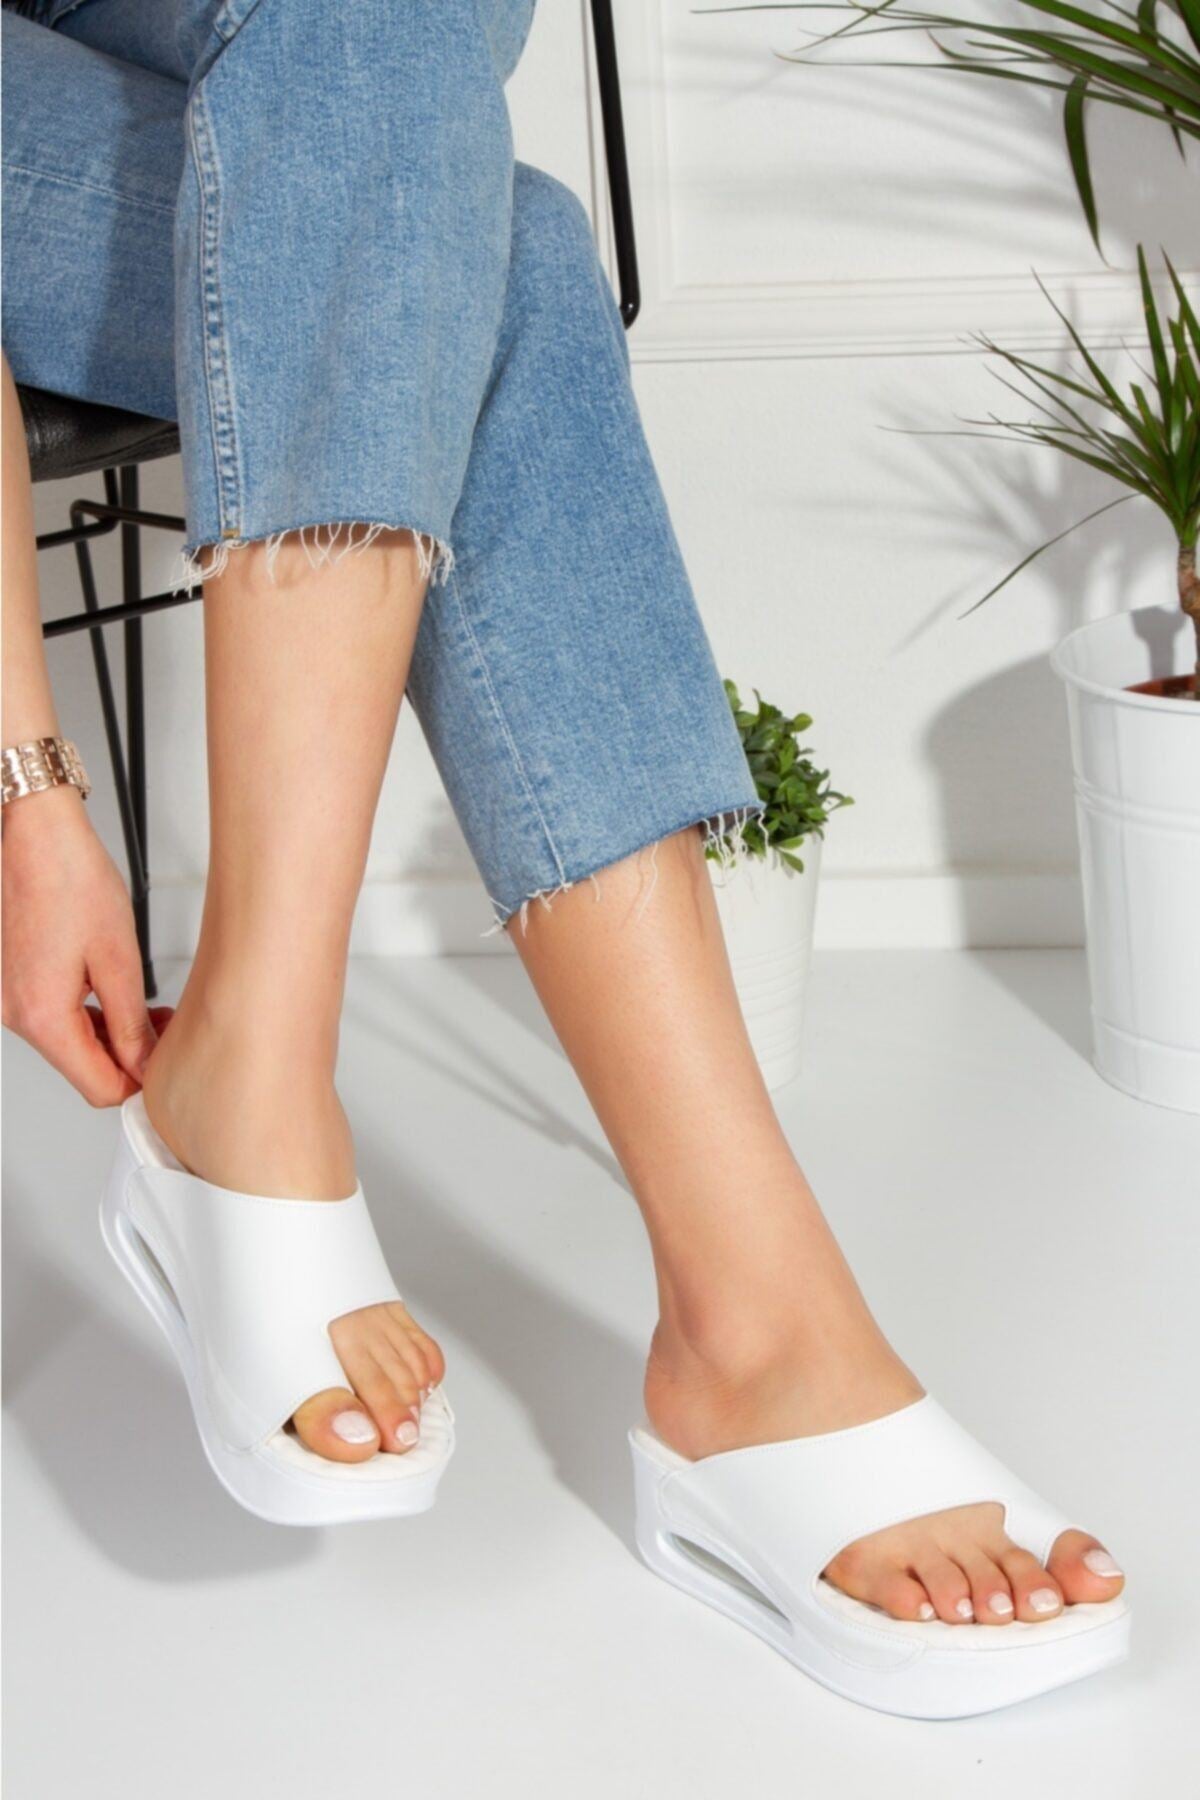 Women's Tools 100% Genuine White Leather Slippers - STREETMODE™